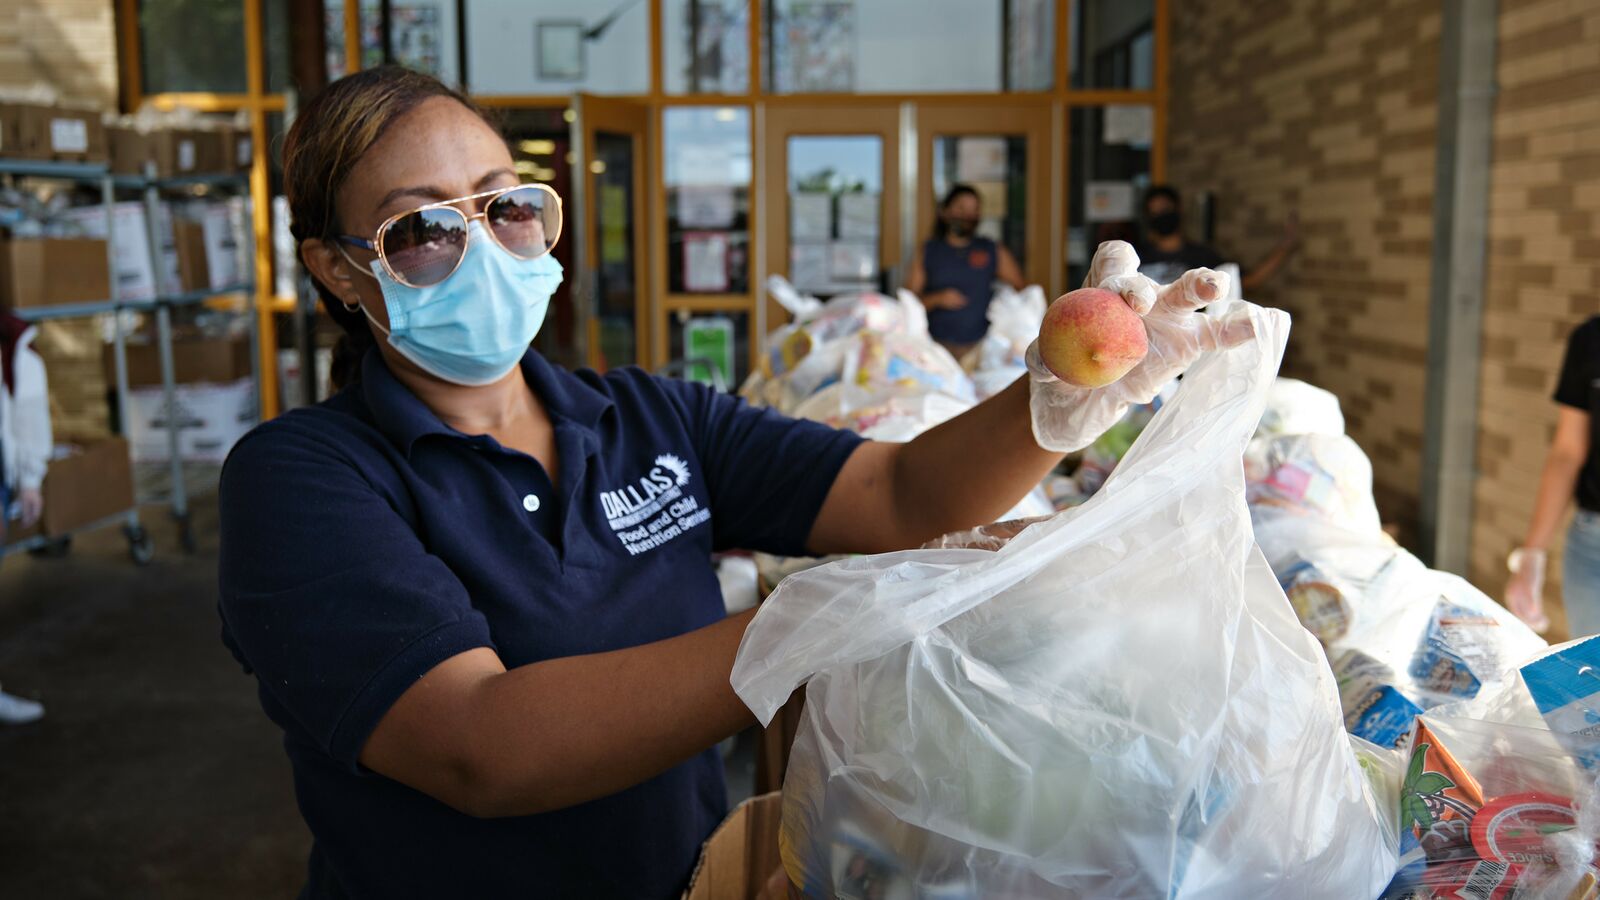 A staff member of a school supported by Urban School Food Alliance organizes meals for distribution in Dallas.